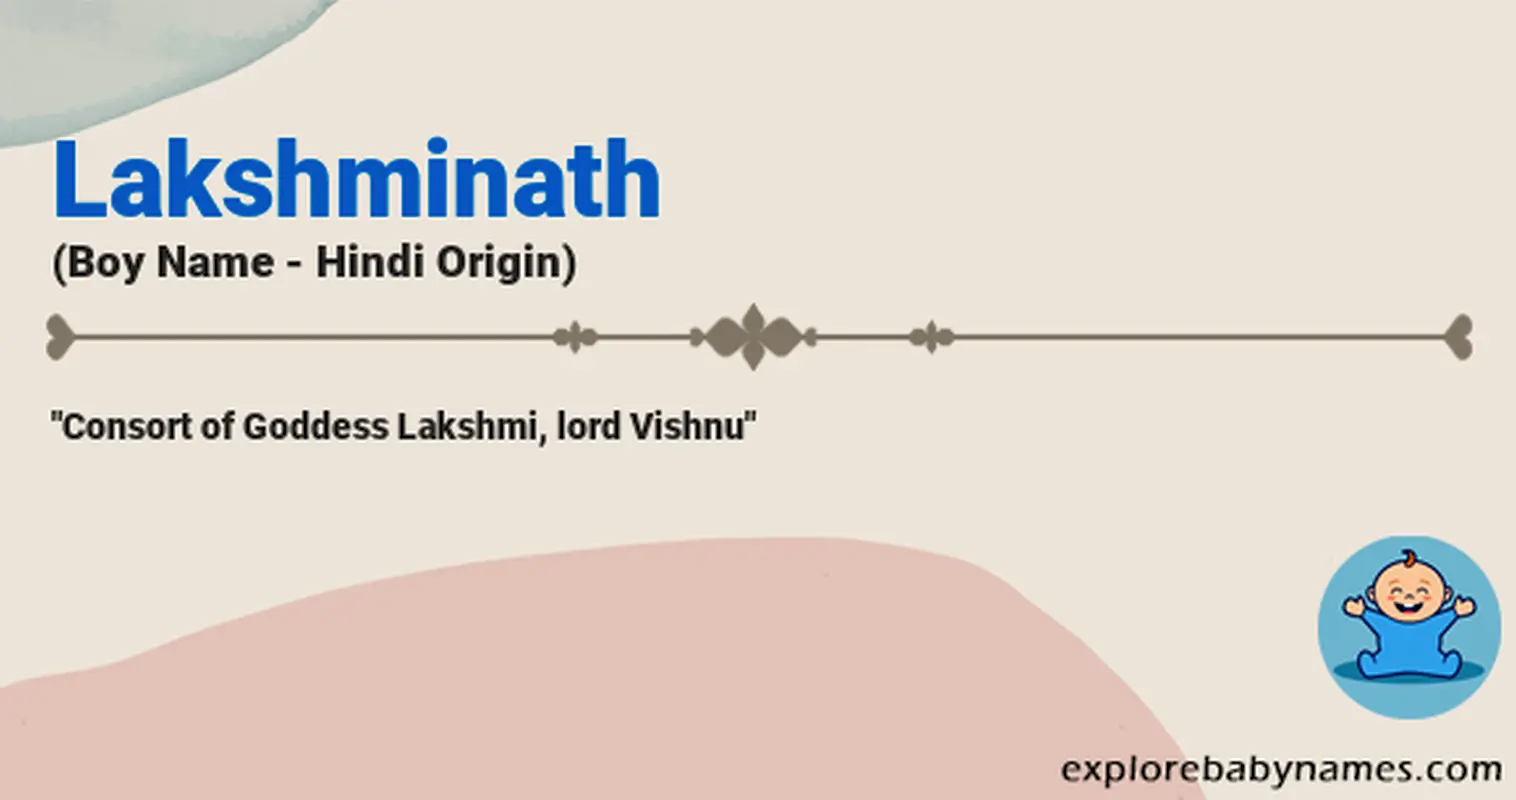 Meaning of Lakshminath